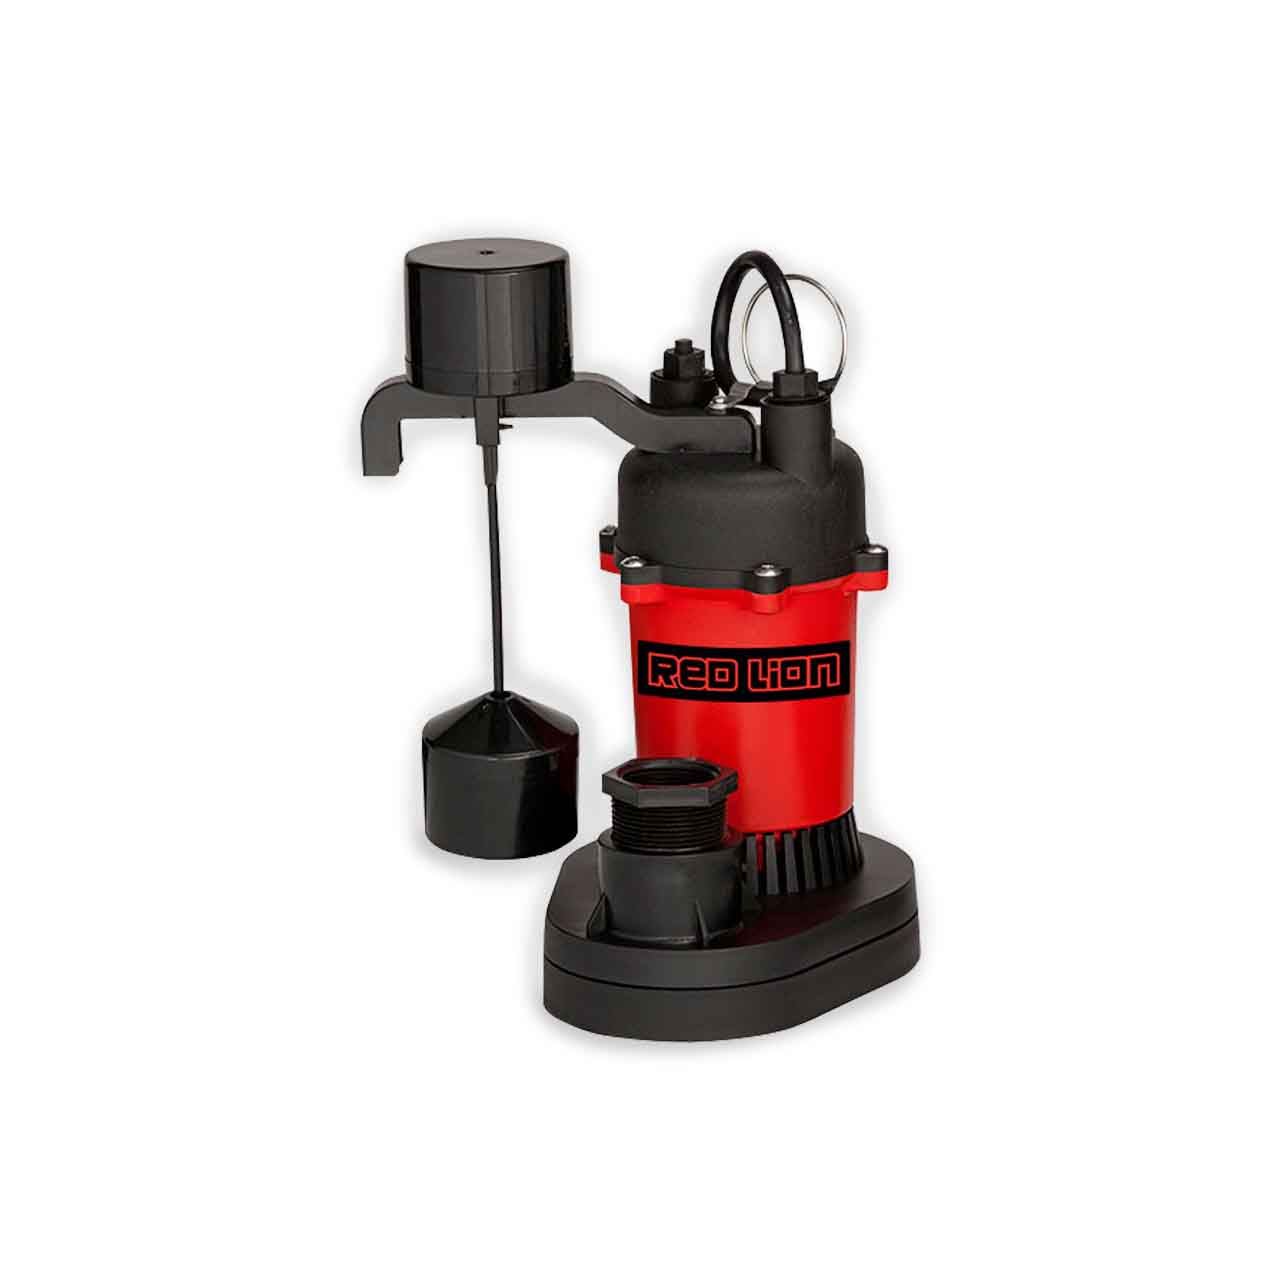 1/3 HP Cast Iron Submersible Sump Pump W/ Tether Float Switch for sale online Red Lion Rl-sc33t 